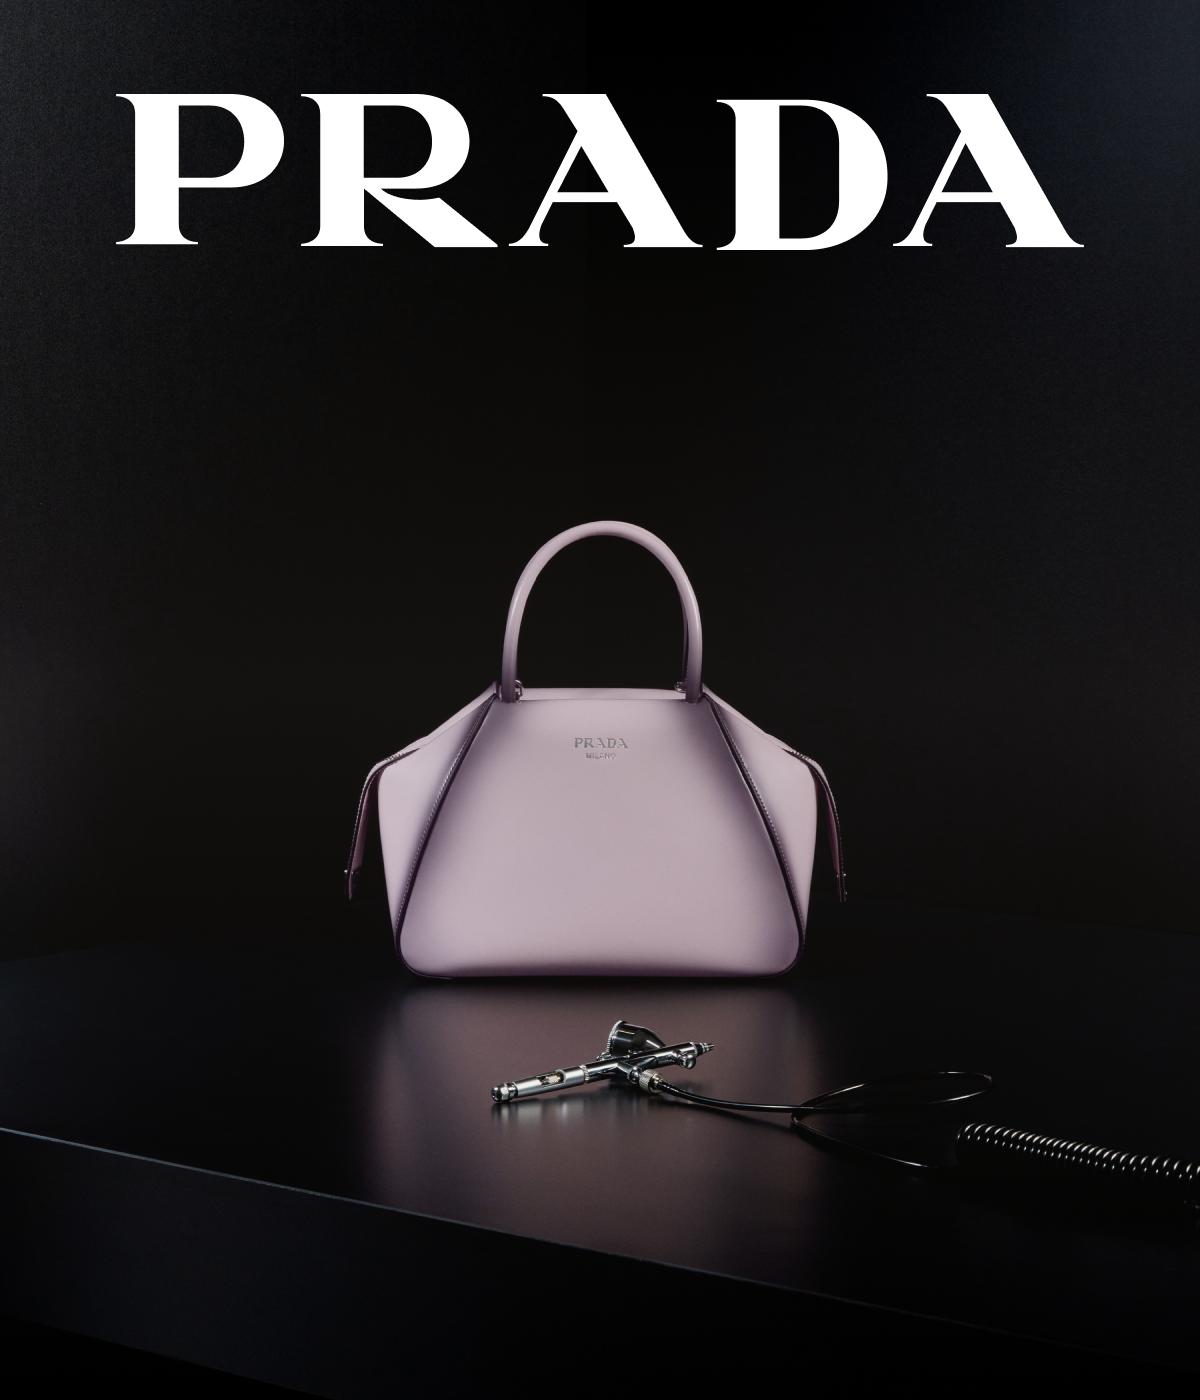 PRADA debuts SUPERNOVA bags in highly-polished Spazzolato leather